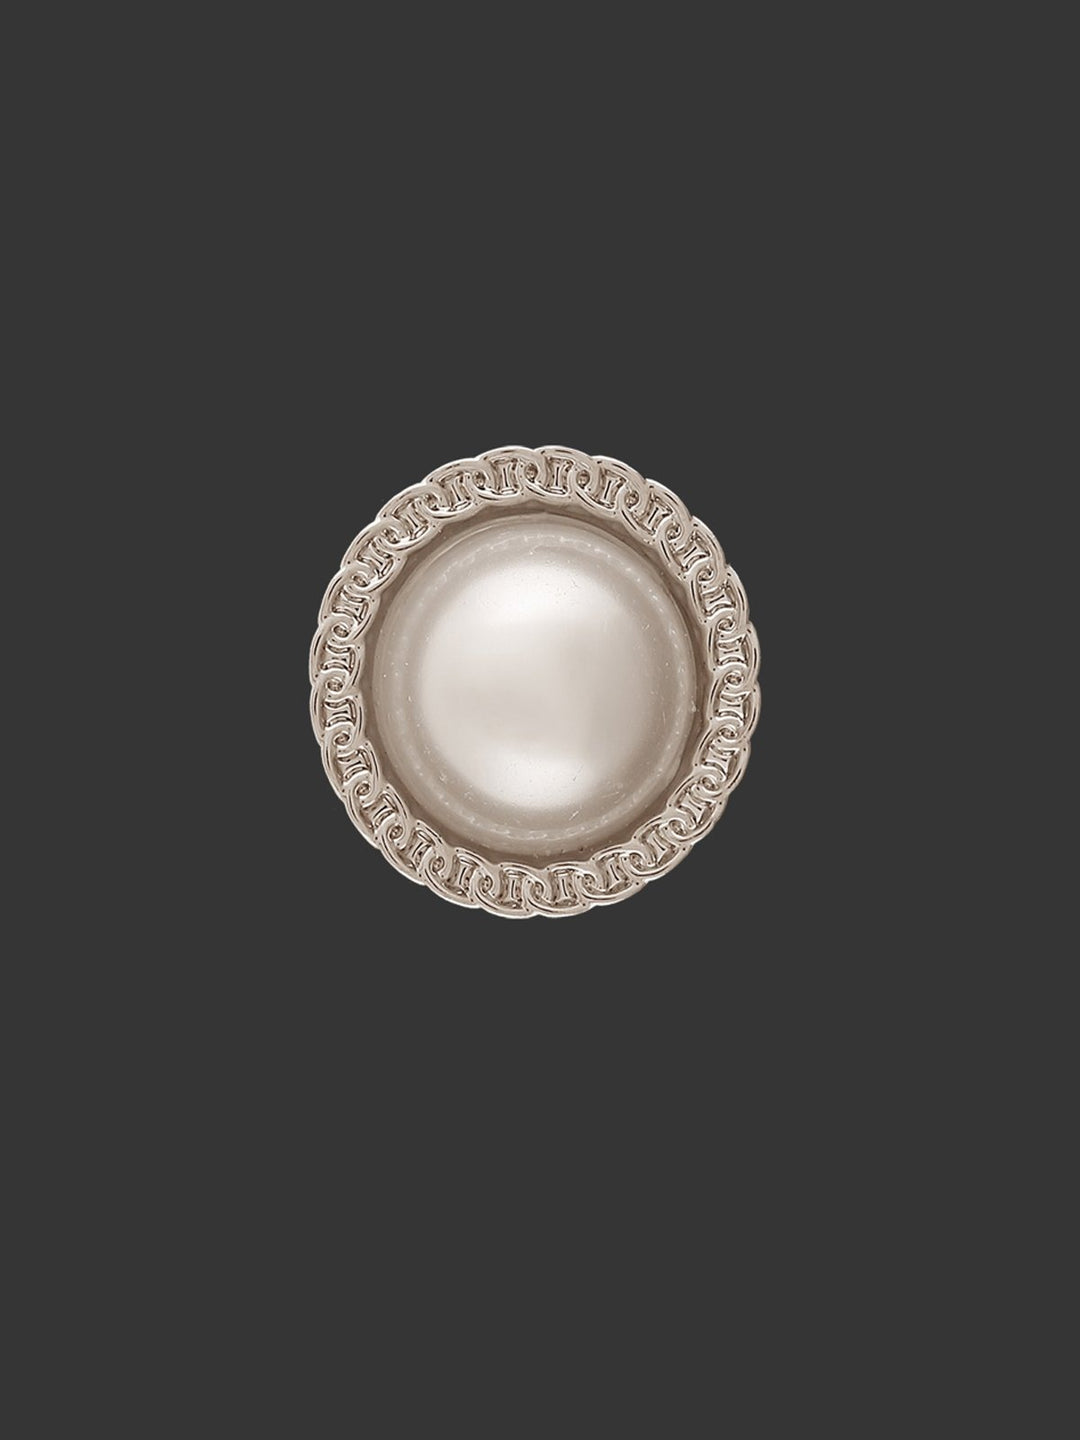 Shiny Round Shape with Chain-Like Design Rim Pearl Button in Silver Color